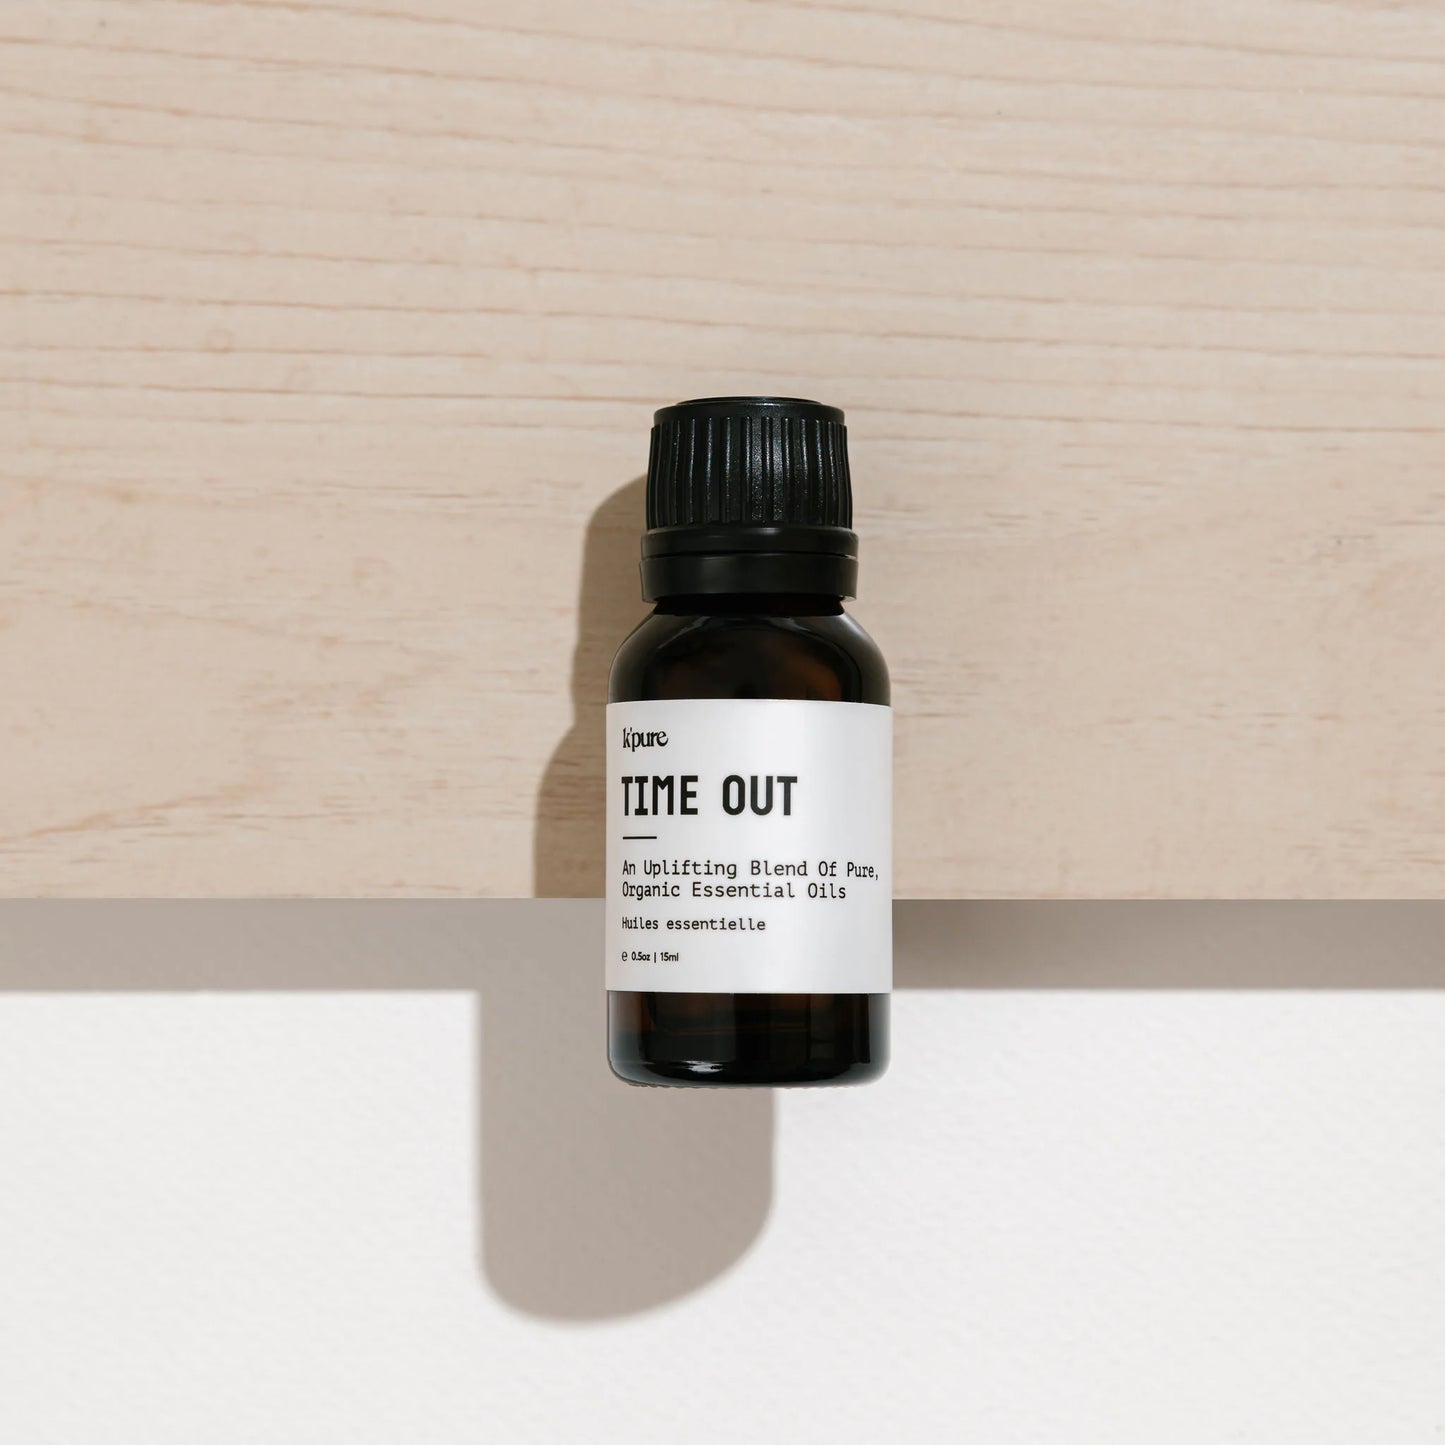 K’pure Naturals - Time Out Essential Oil Blend